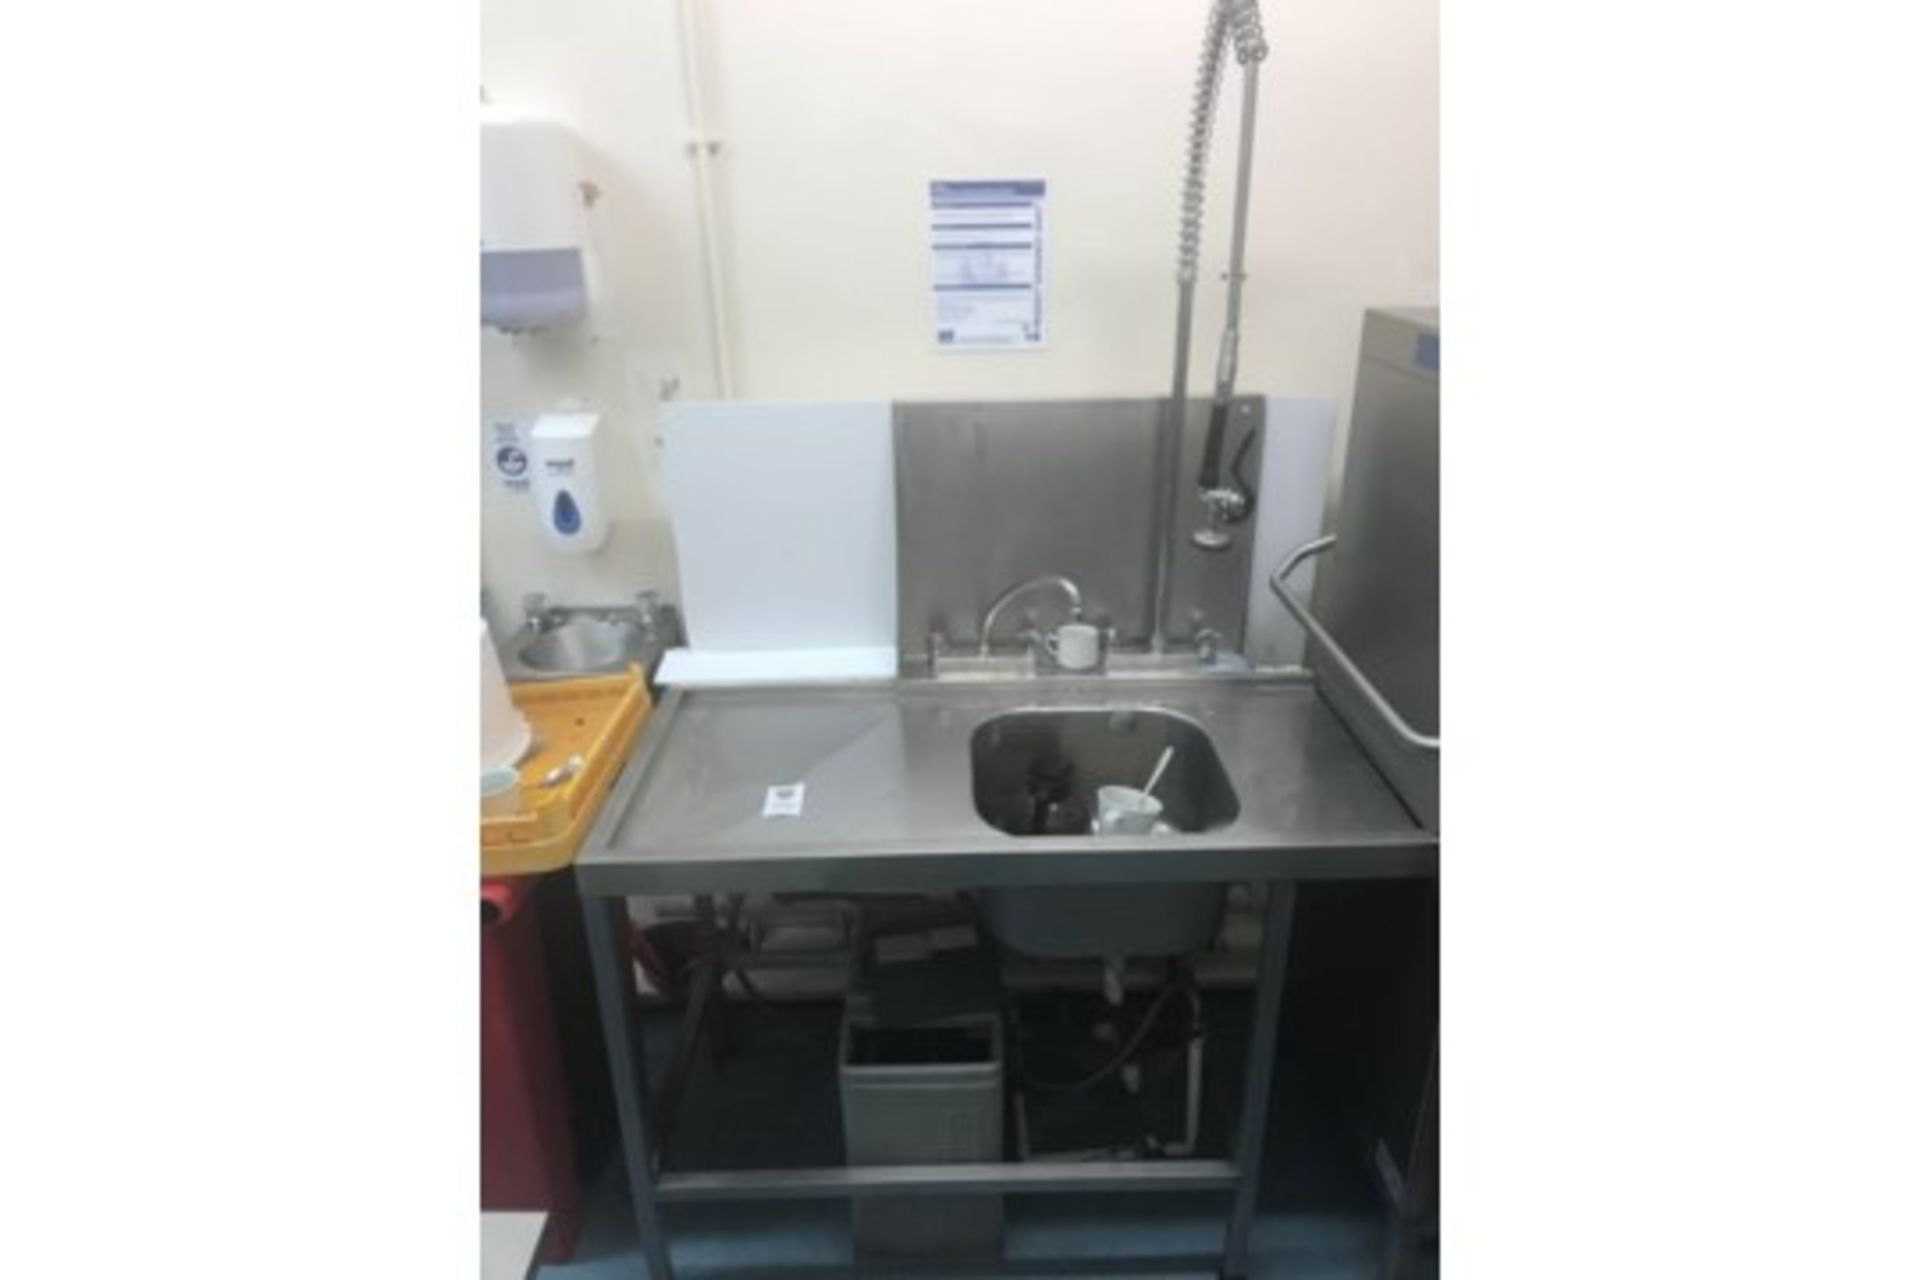 Stainless Steel Kitchen Sink With Shower Hose